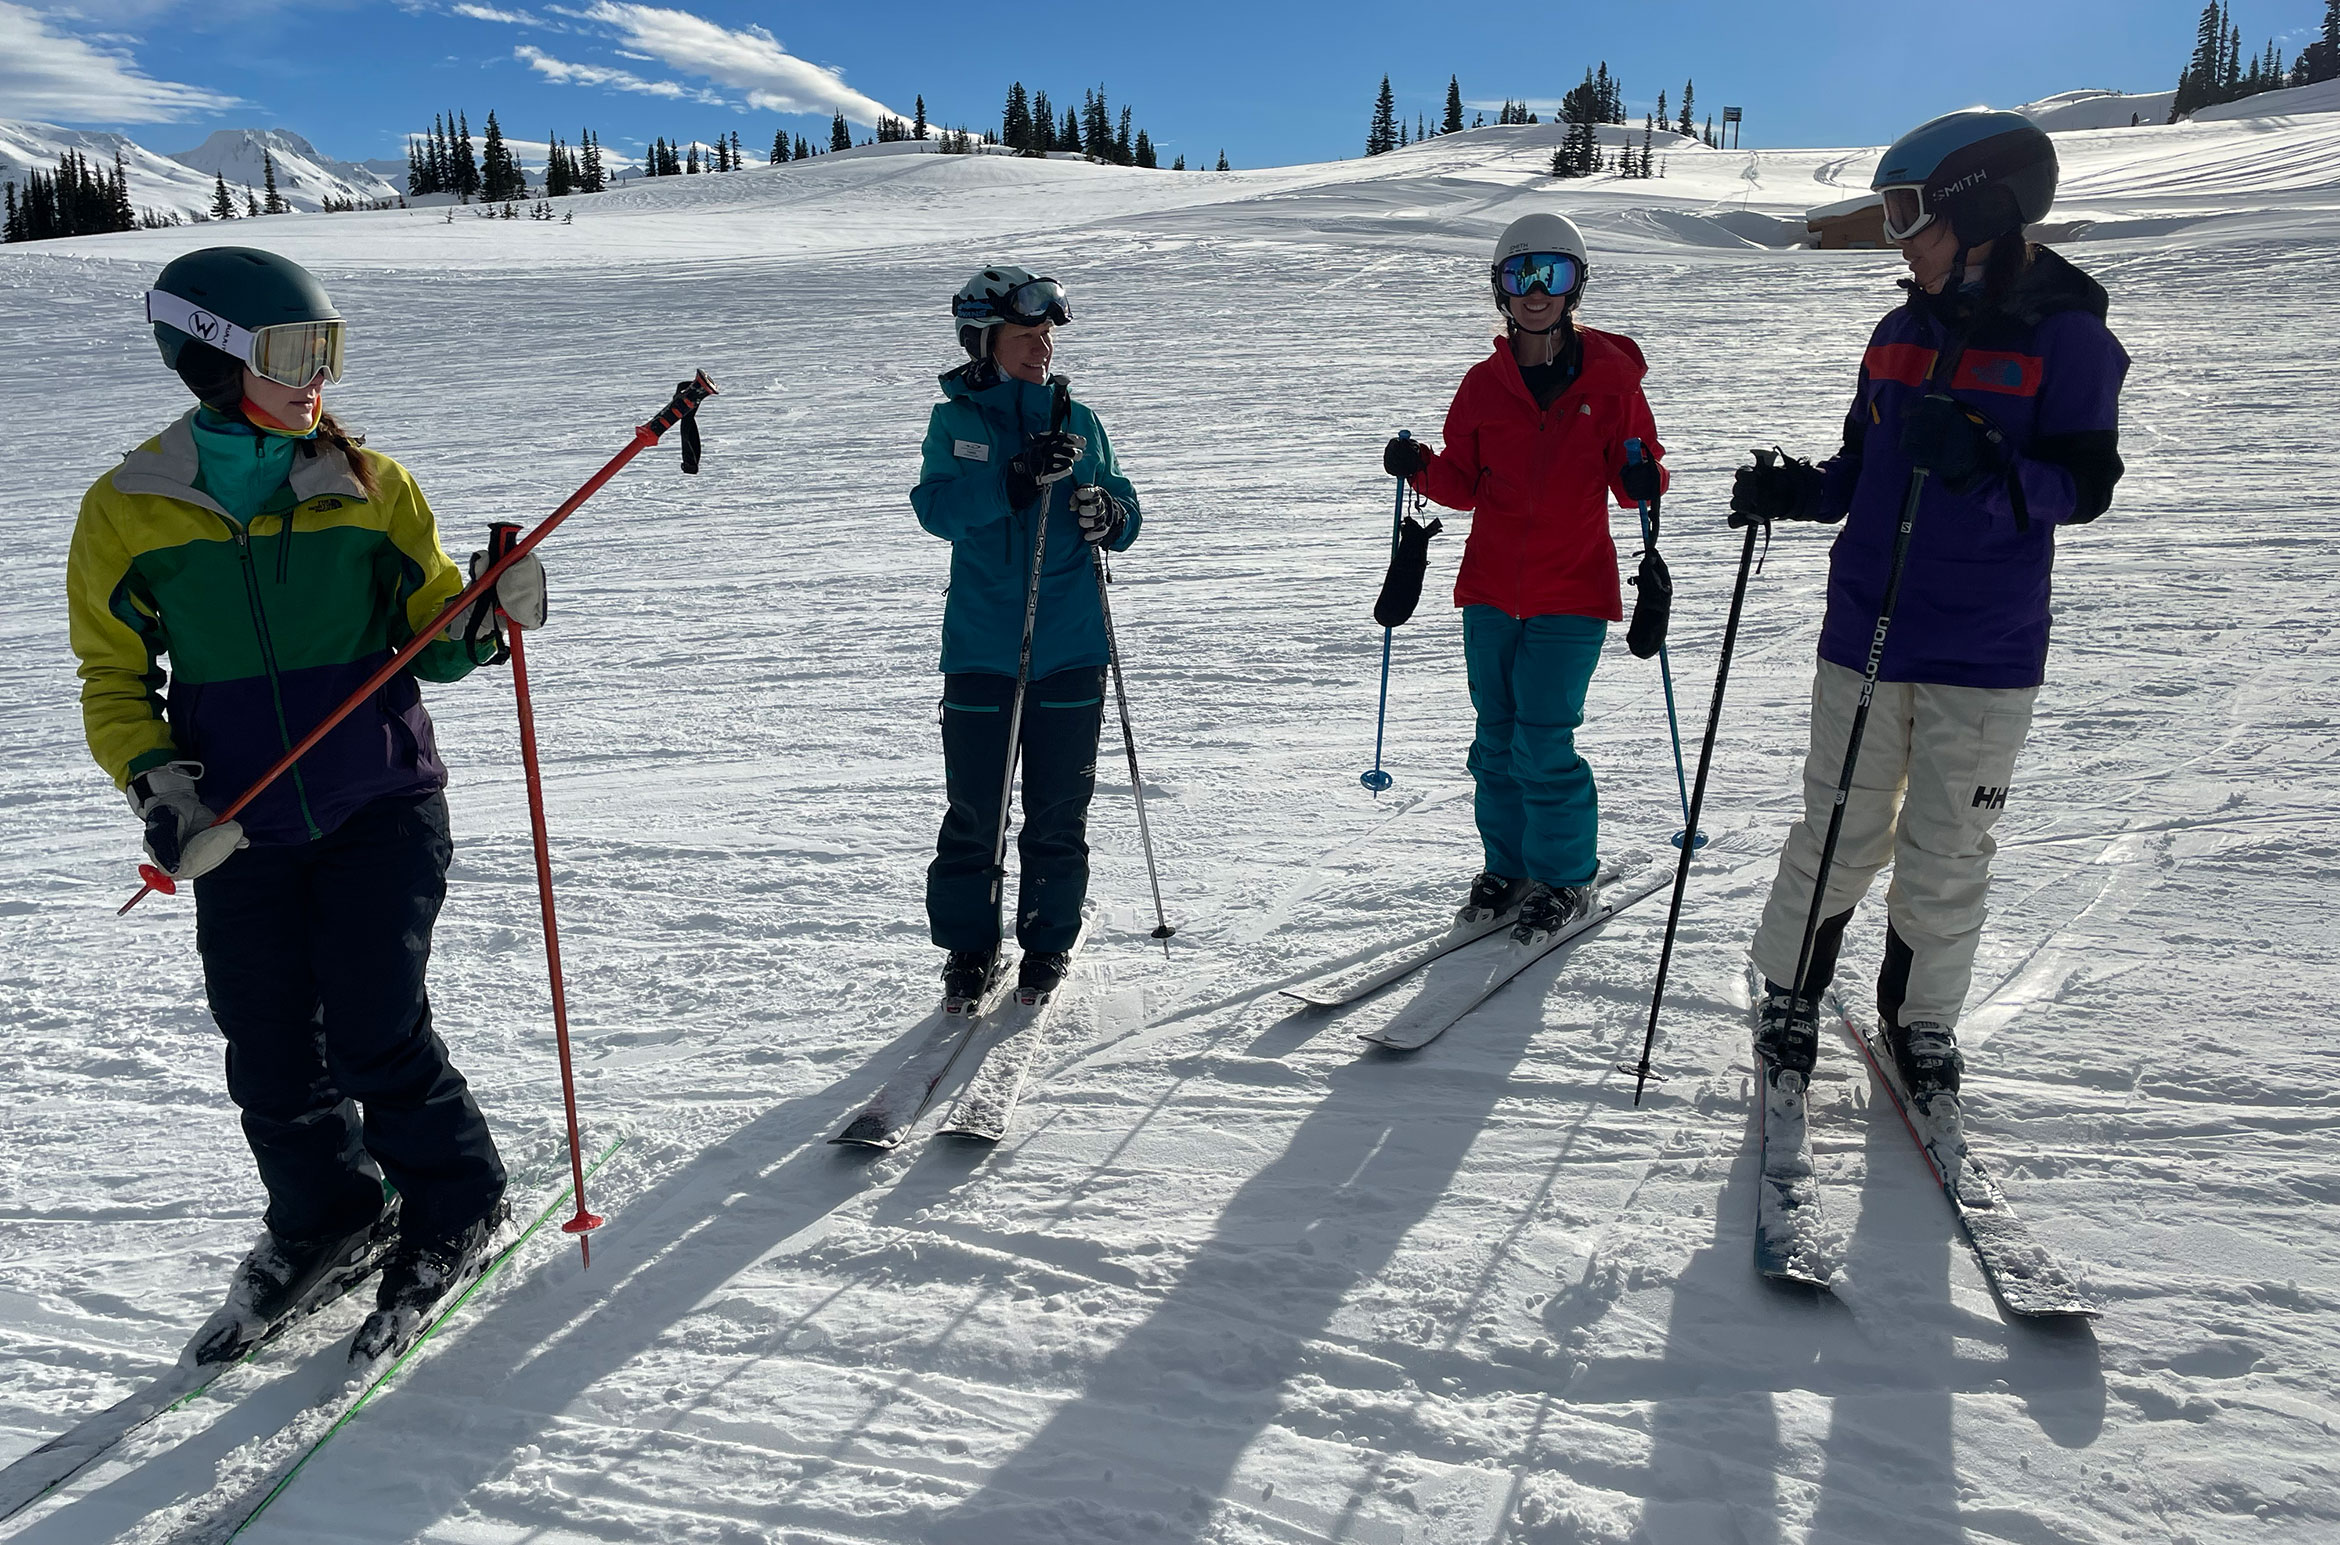 Four skiers stop on a slope in the sun for some instruction from their coach.